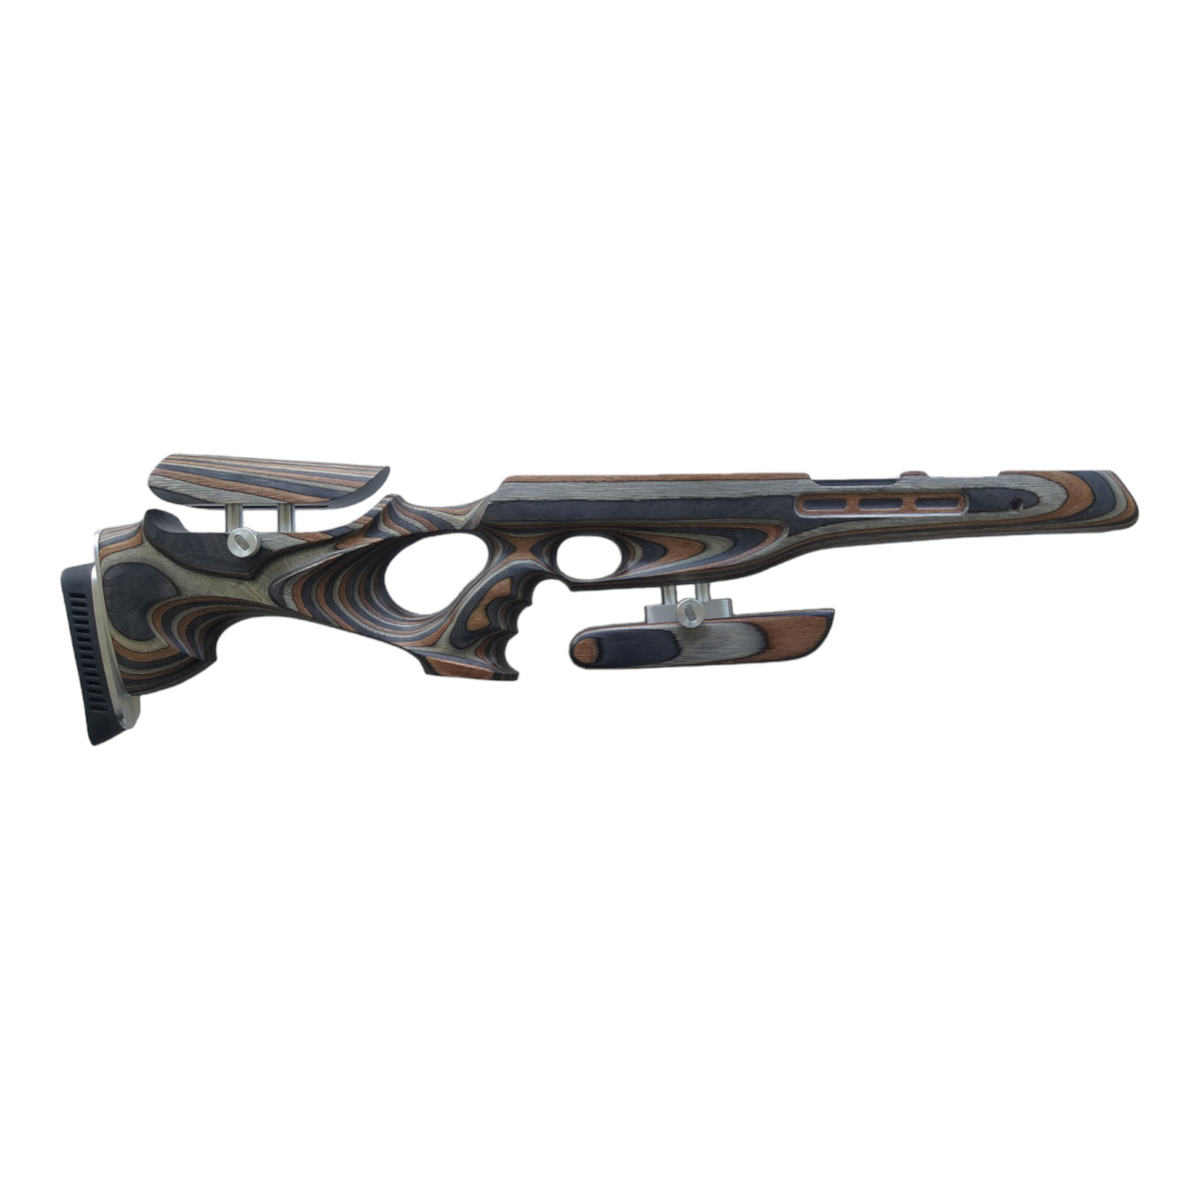 Custom stock for Air Arms TX(HC)200 FT edition "Mountain Camo" laminate + hamster,cheek riser and pad